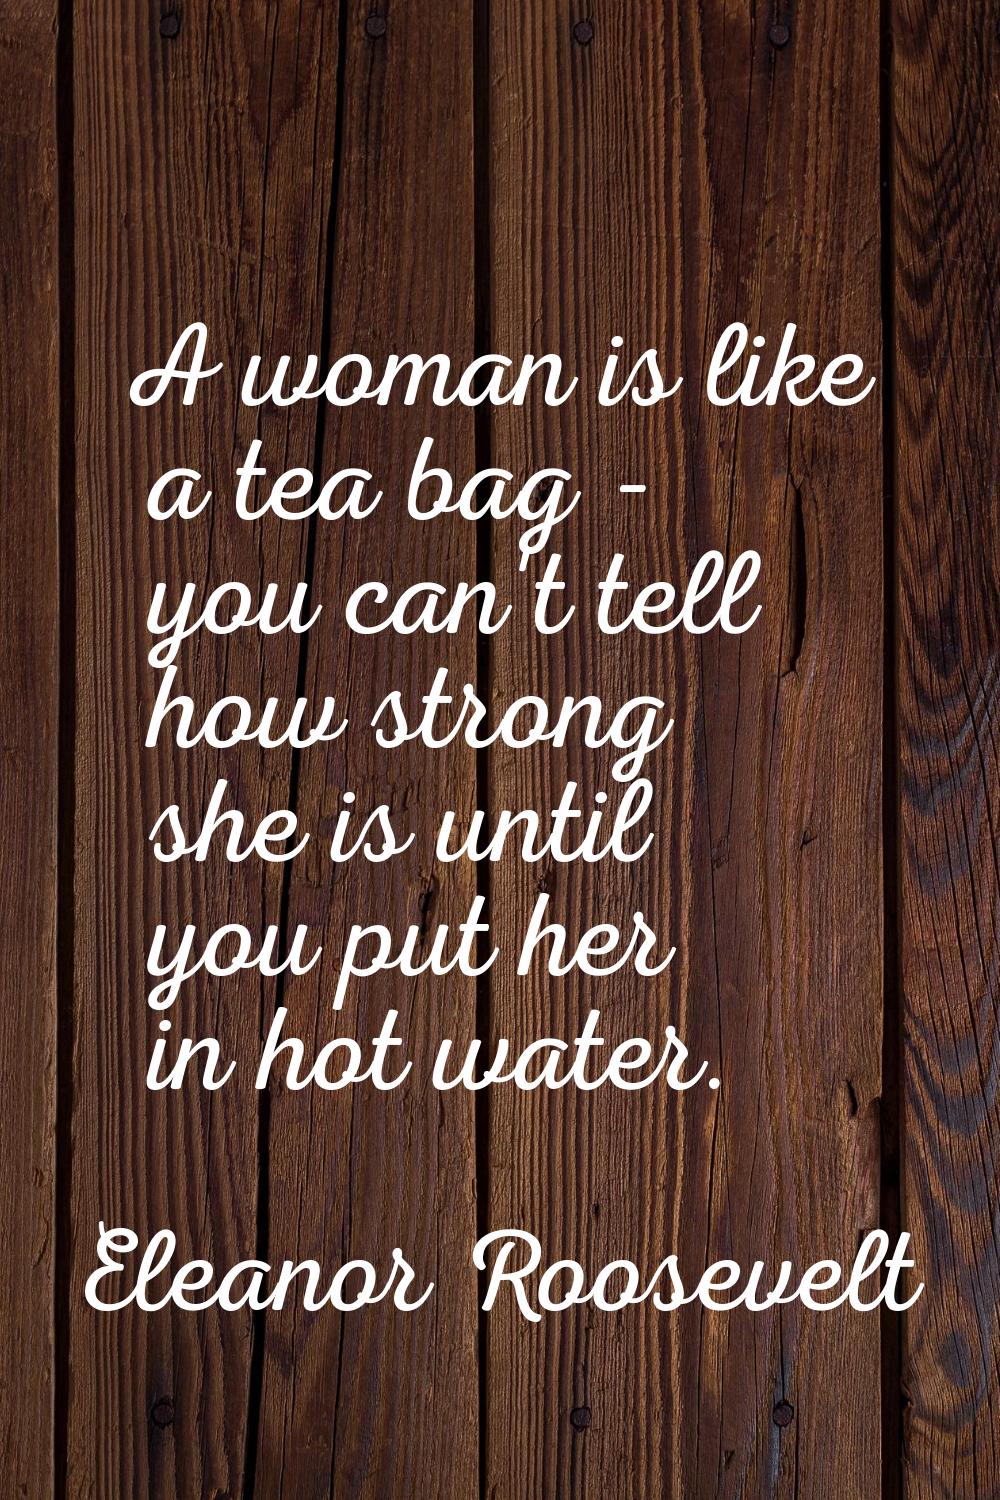 A woman is like a tea bag - you can't tell how strong she is until you put her in hot water.